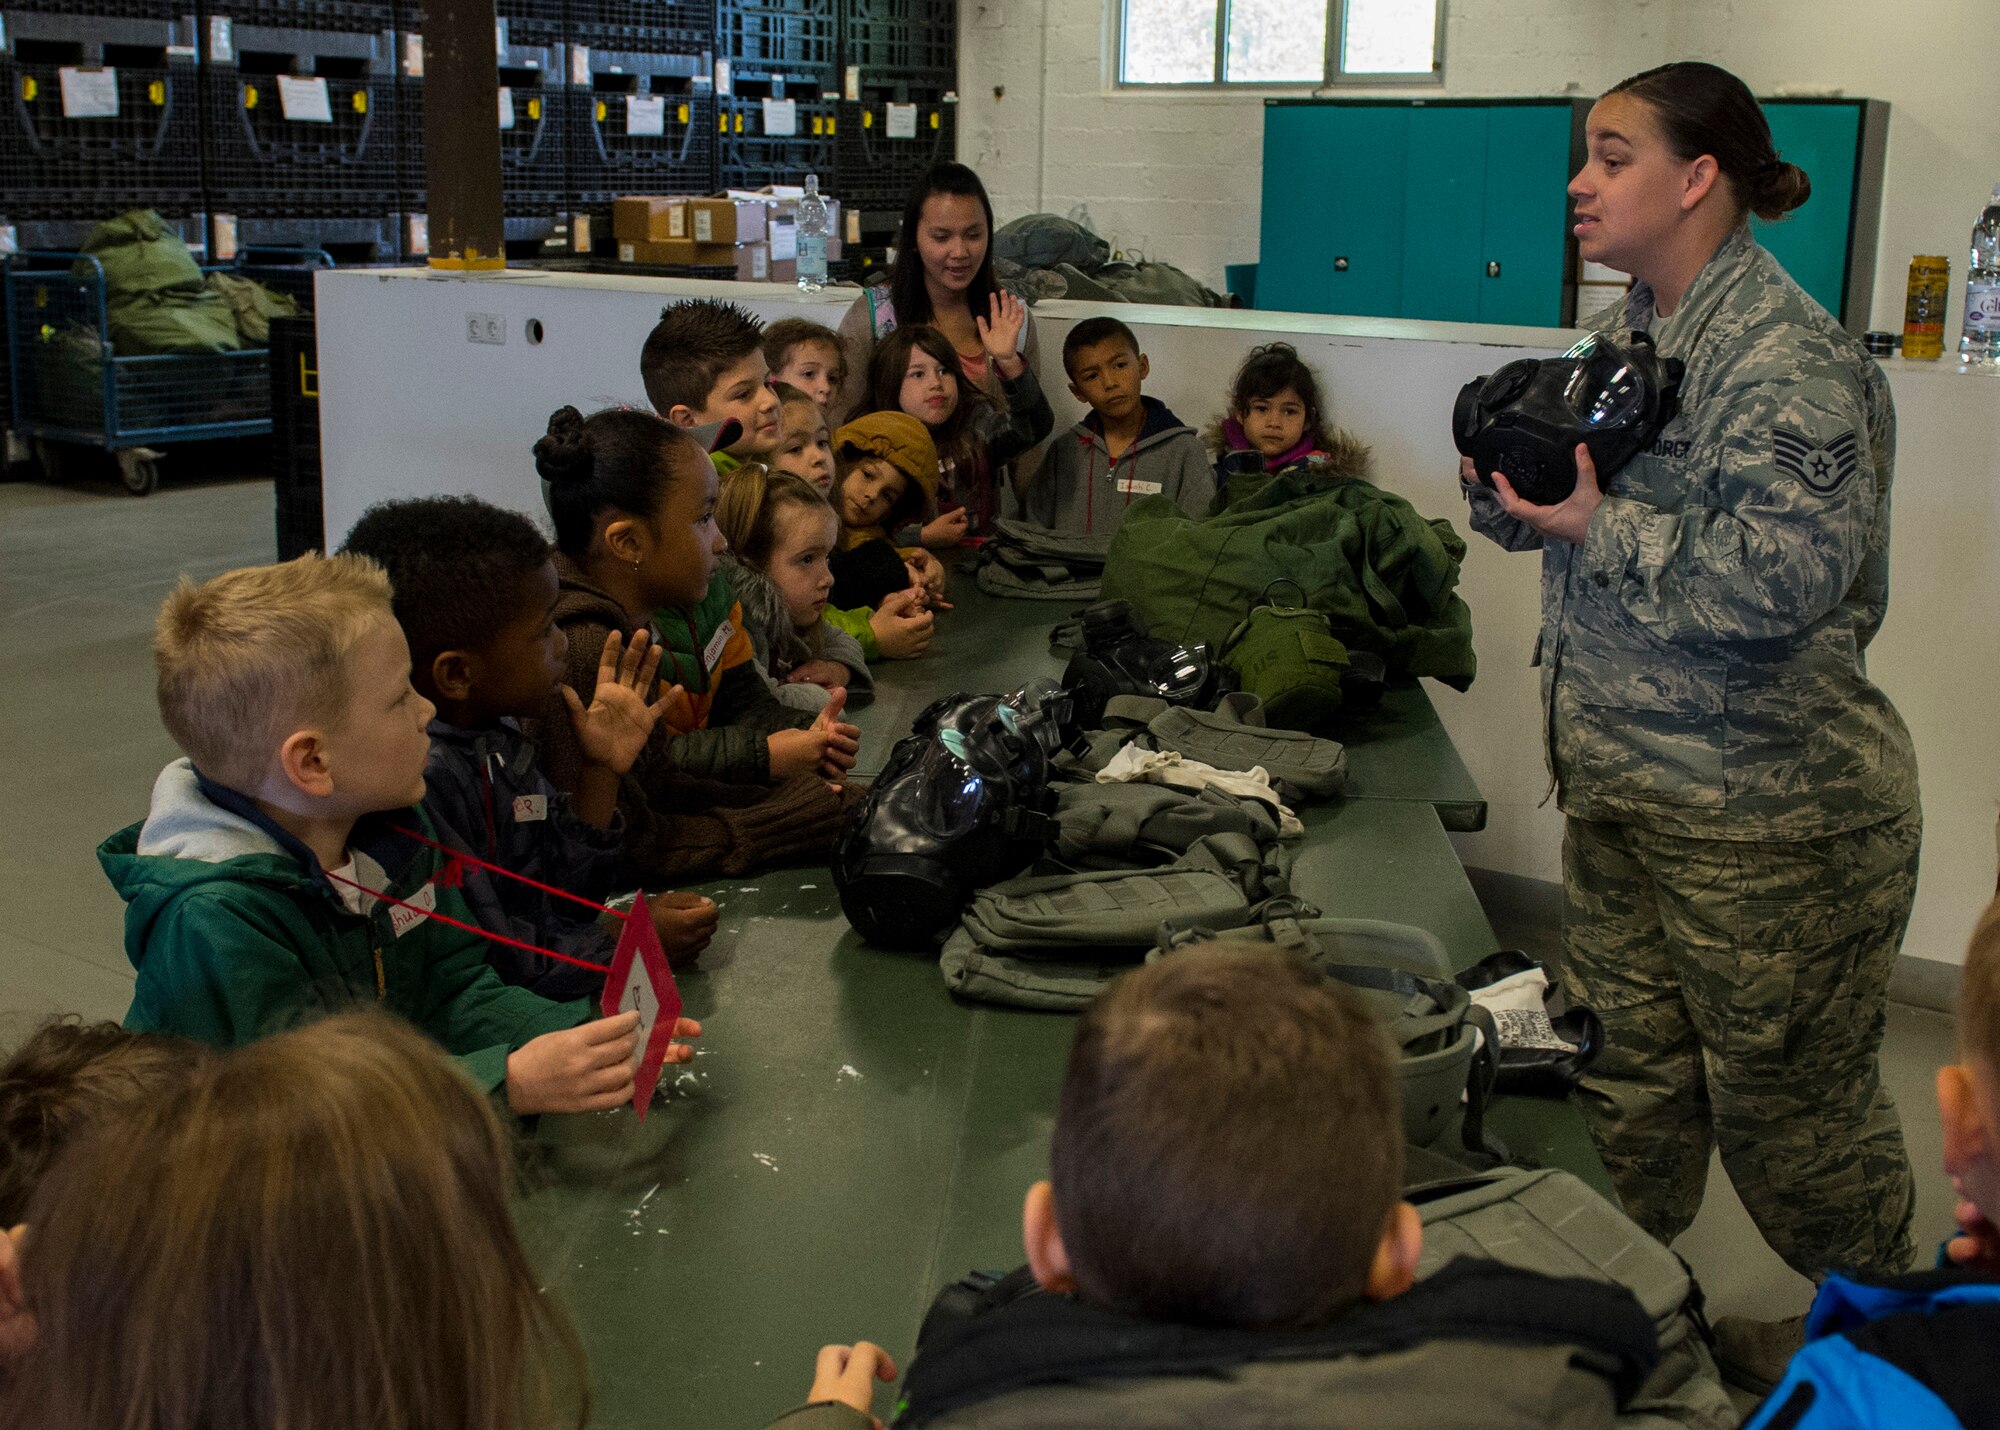 U.S. Air Force Staff Sgt. Amy Dietrich, 52nd Logistics Readiness Squadron document control NCO in charge, explains the use of mission-oriented protective posture gear to students of Spangdahlem Elementary School during Kids’ Deployment Day at Spangdahlem Air Base, Germany, April 29, 2015. The simulated deployment consisted of four different stations including vehicles, equipment, safety information and air transportation. (U.S. Air Force photo by Airman 1st Class Luke Kitterman/Released)   
